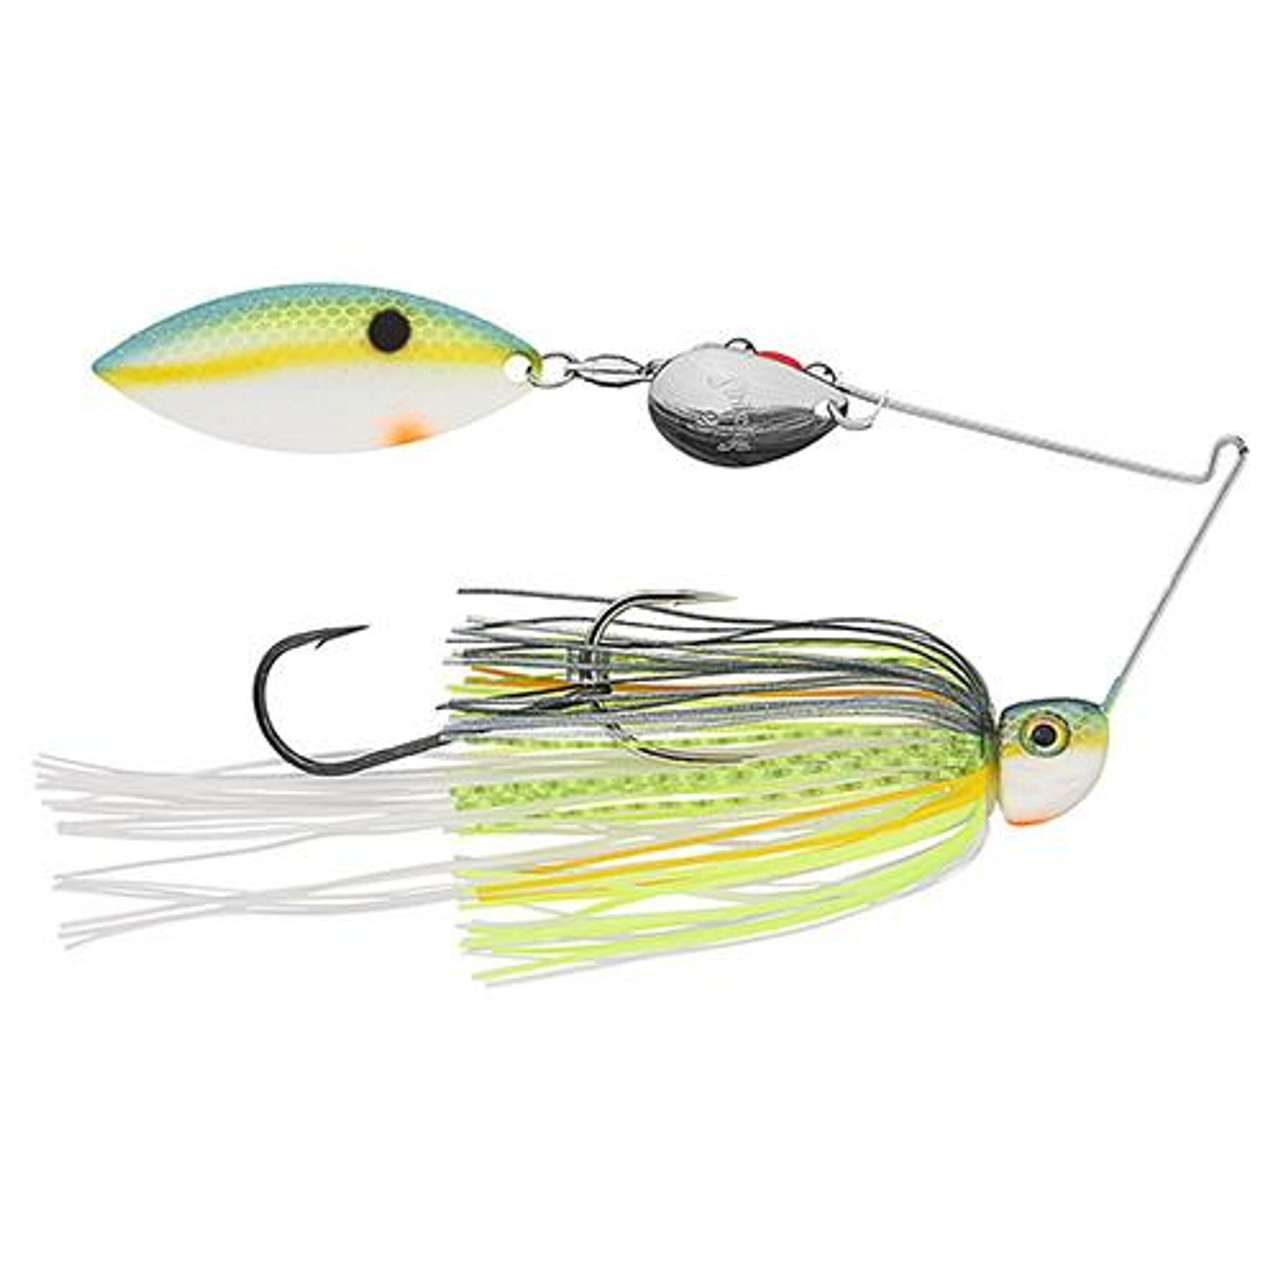 Strike King Lures Tour Grade Painted Blade Spinnerbait 4/0 Front Hook 2/0  Trailer Hook, 3/8 oz, Chartreuse Sexy Shad, Package of 1